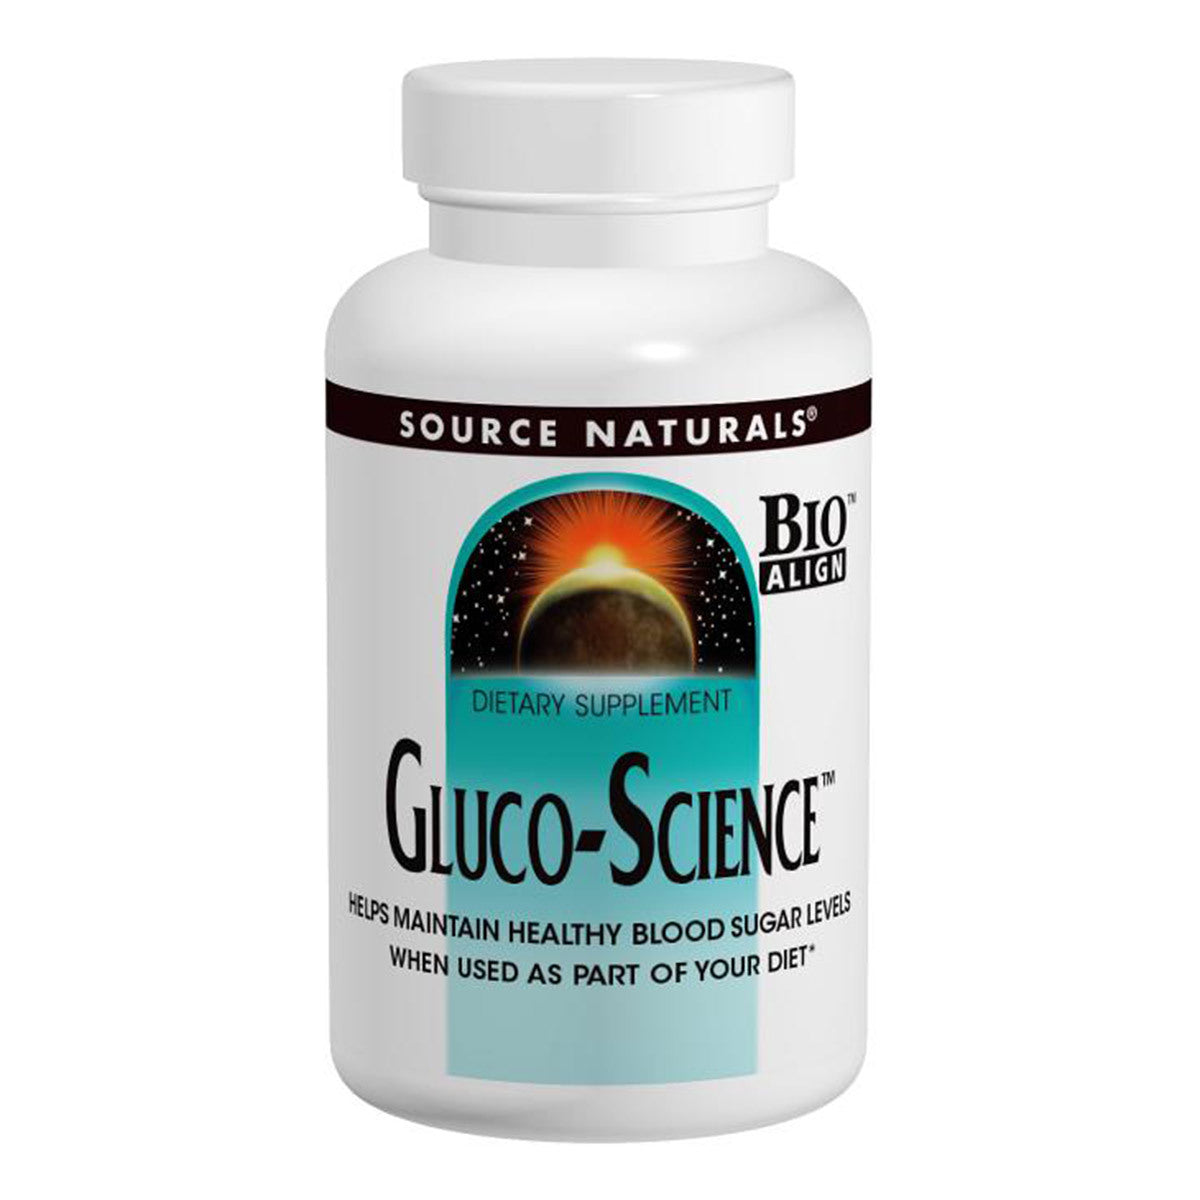 Primary image of Gluco-Science